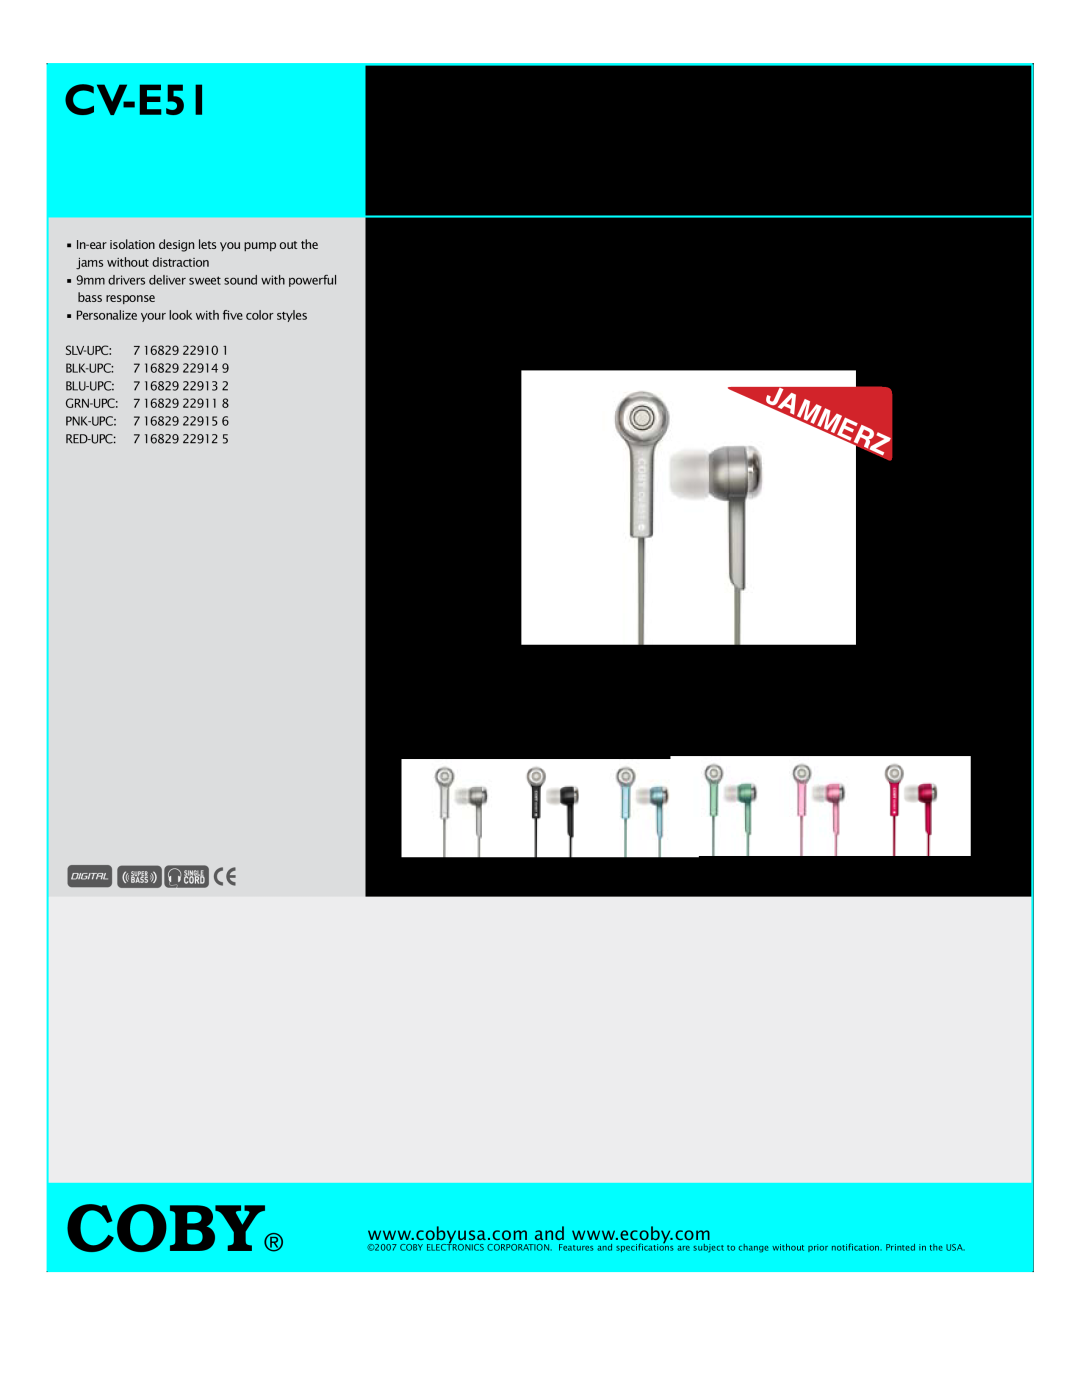 COBY electronic CV-E51 specifications Coby, Digital Stereo, Earphones 